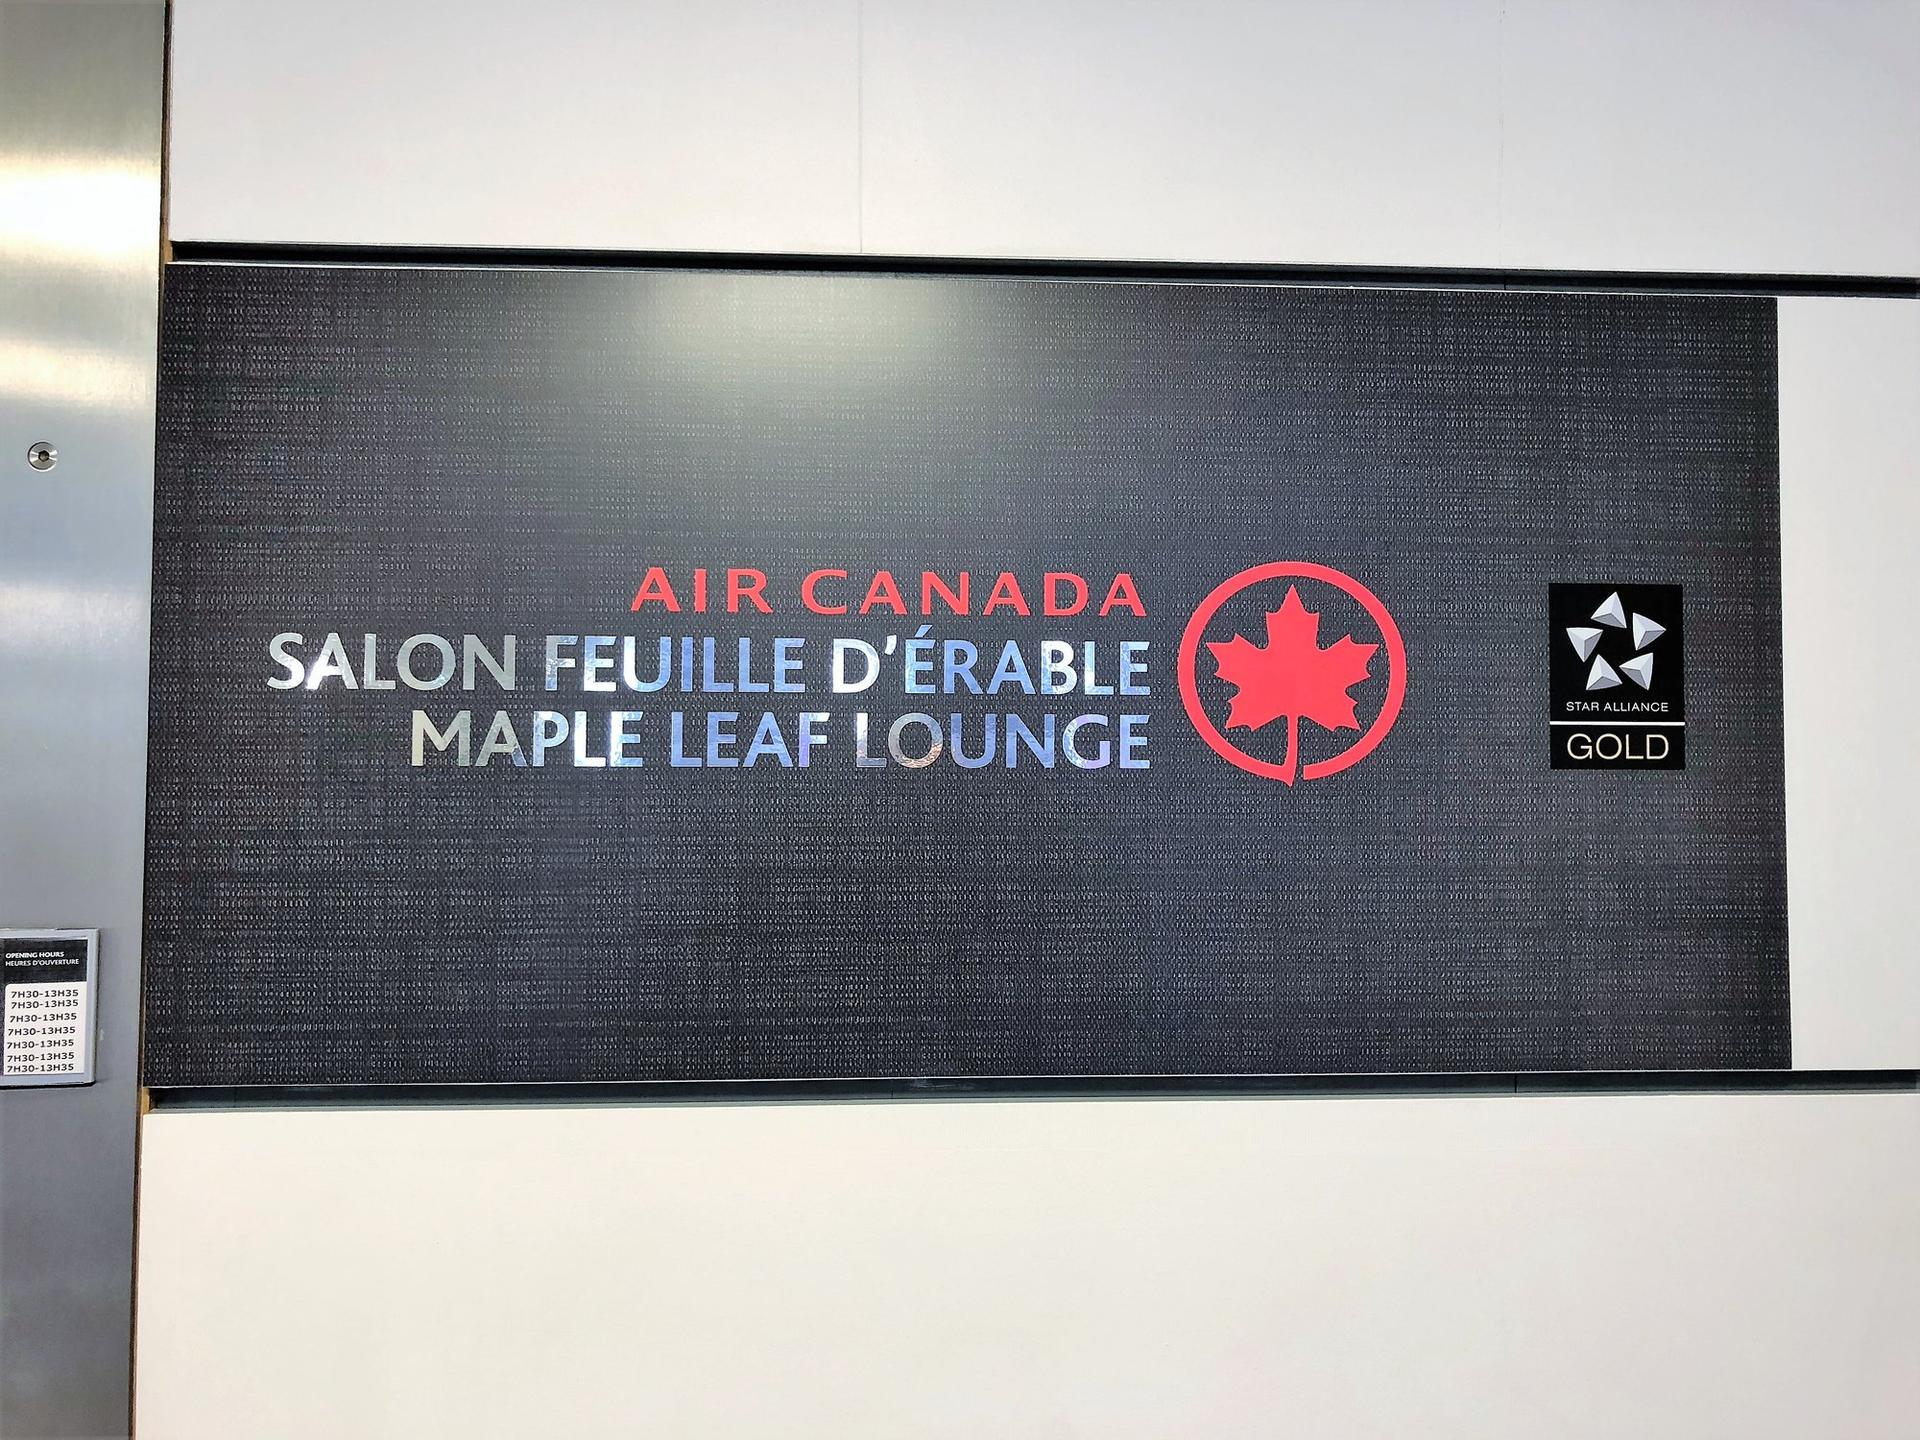 Air Canada Maple Leaf Lounge image 31 of 64